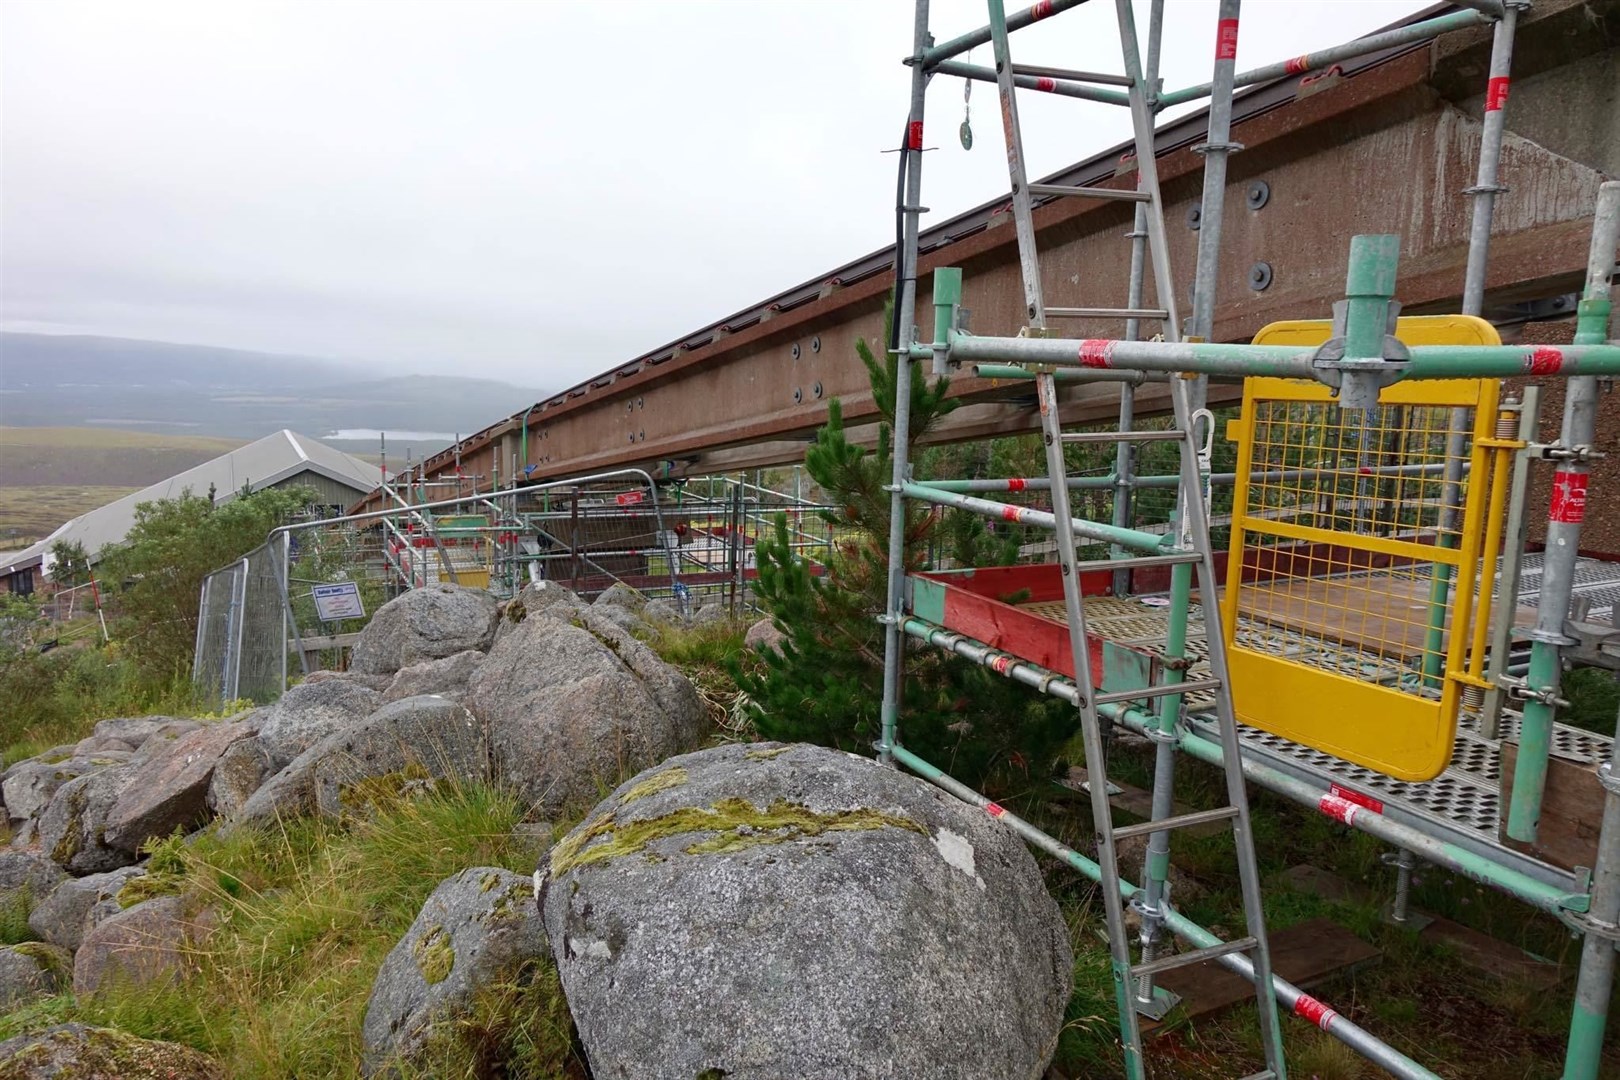 CONCERNS: How will the repairs to the Highland mountain railway be funded?